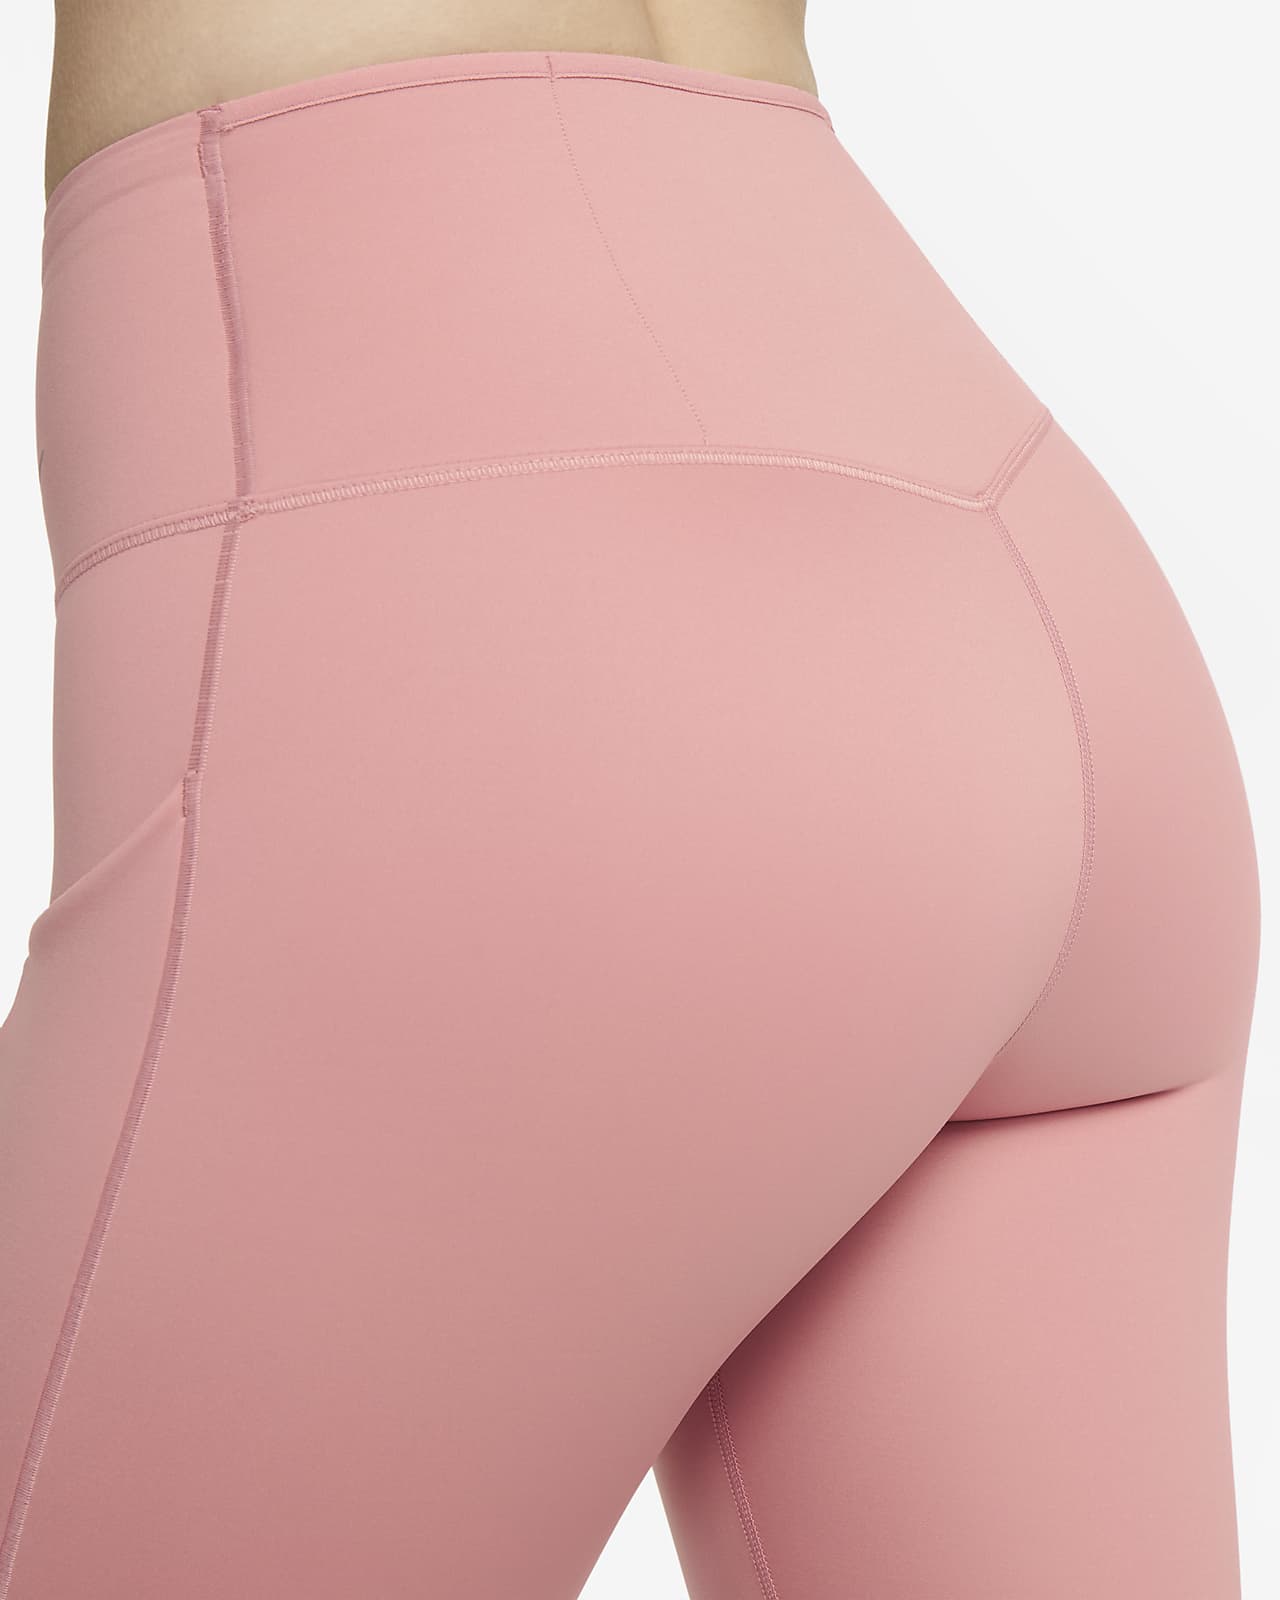 Nike Go Women's Firm-Support Mid-Rise 7/8 Leggings with Pockets. Nike UK